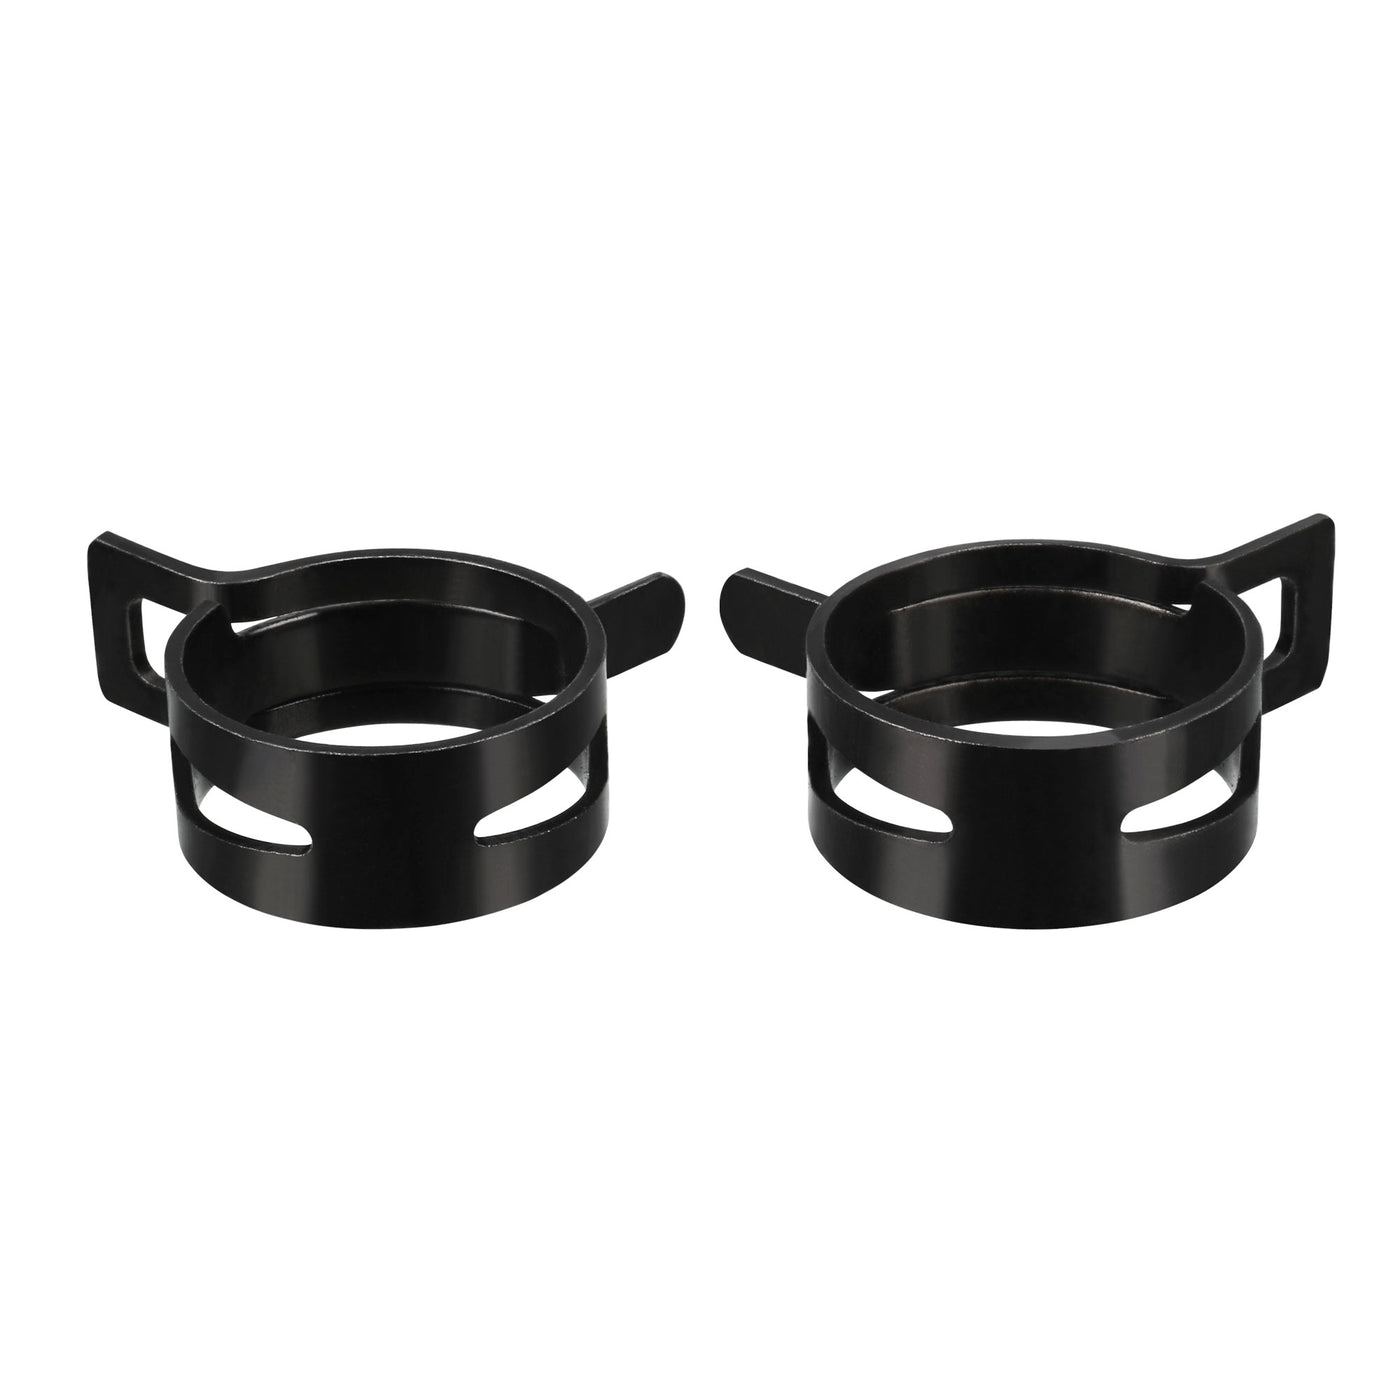 uxcell Uxcell Steel Band Clamp 25mm for Fuel Line Silicone Hose Tube Spring Clips Clamp Black Manganese Steel 10Pcs